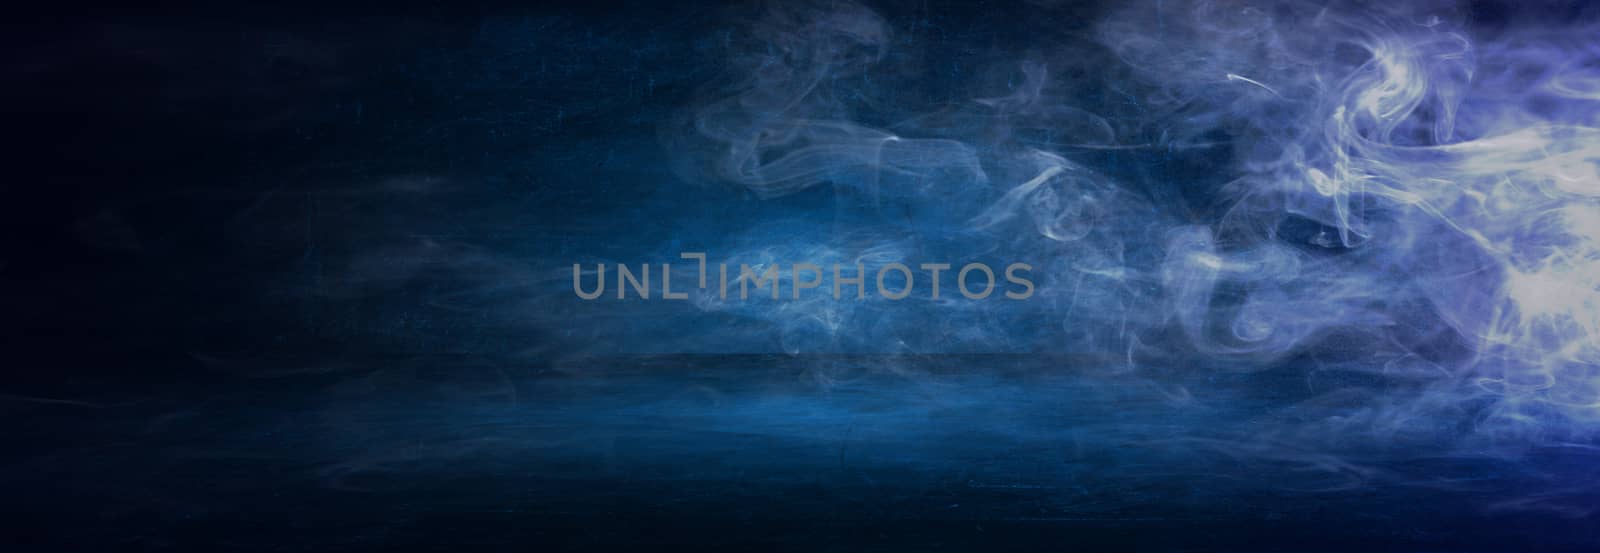 dark blue cement wall studio background with mist or fog, colorful smoke backdrop 